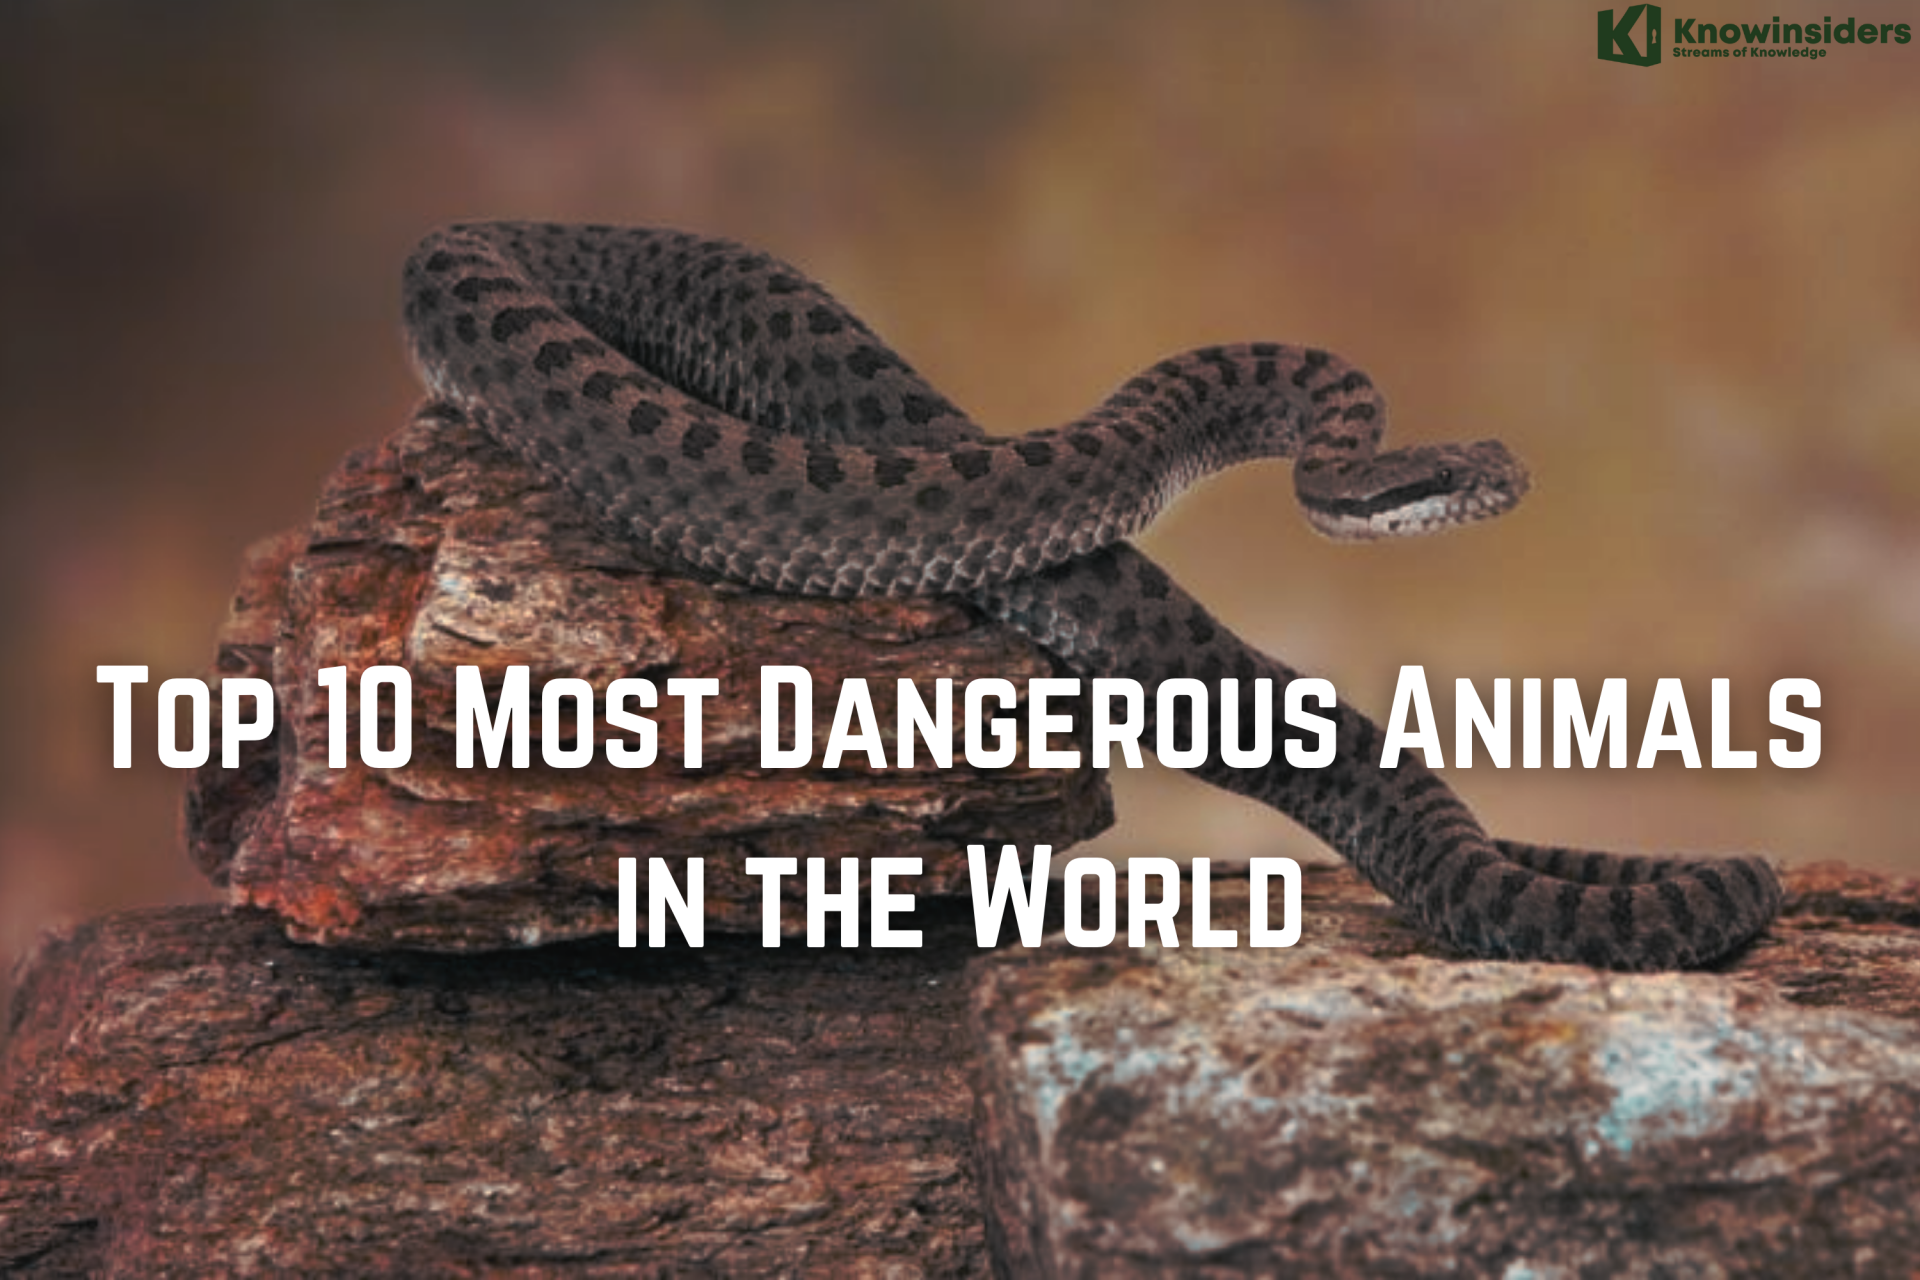 Top 10 Most Dangerous Animals in the World